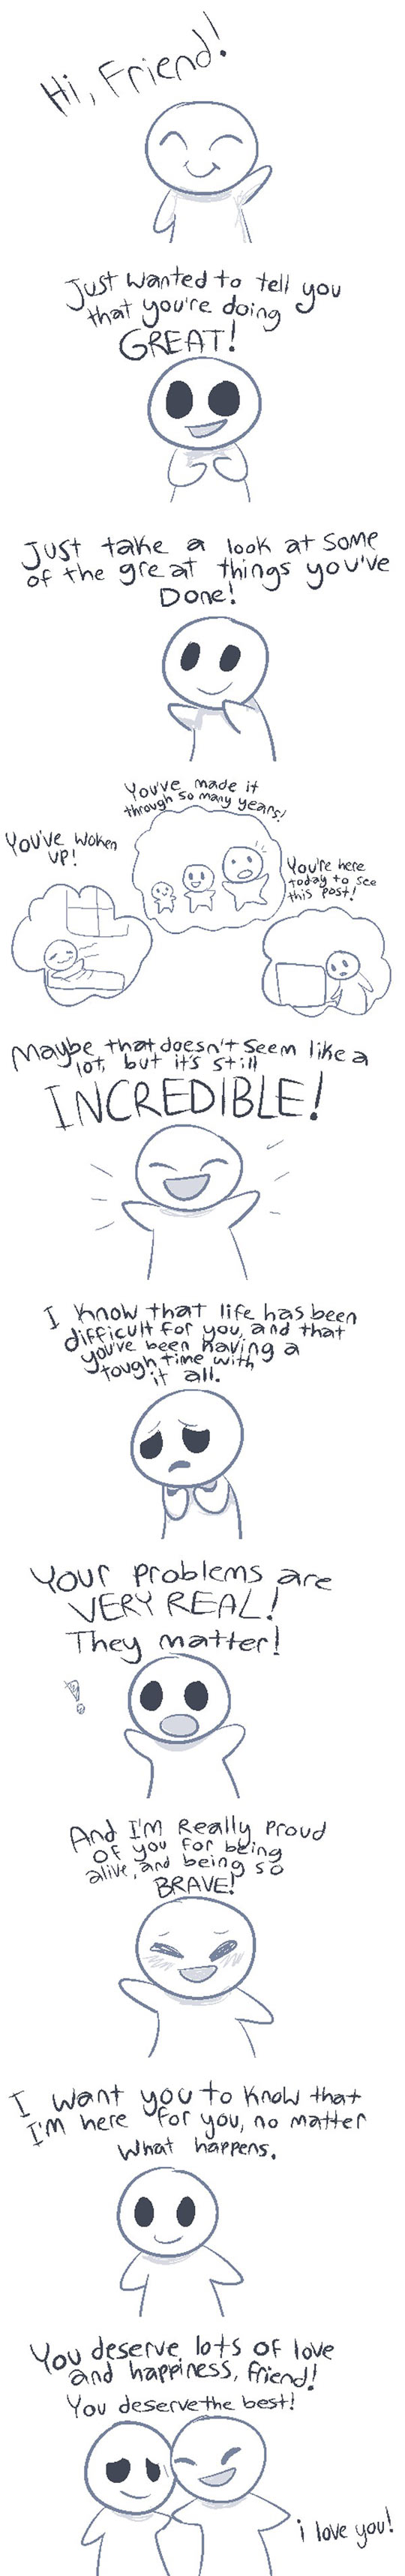 Positivity Comic to All You Wonderful People Out There